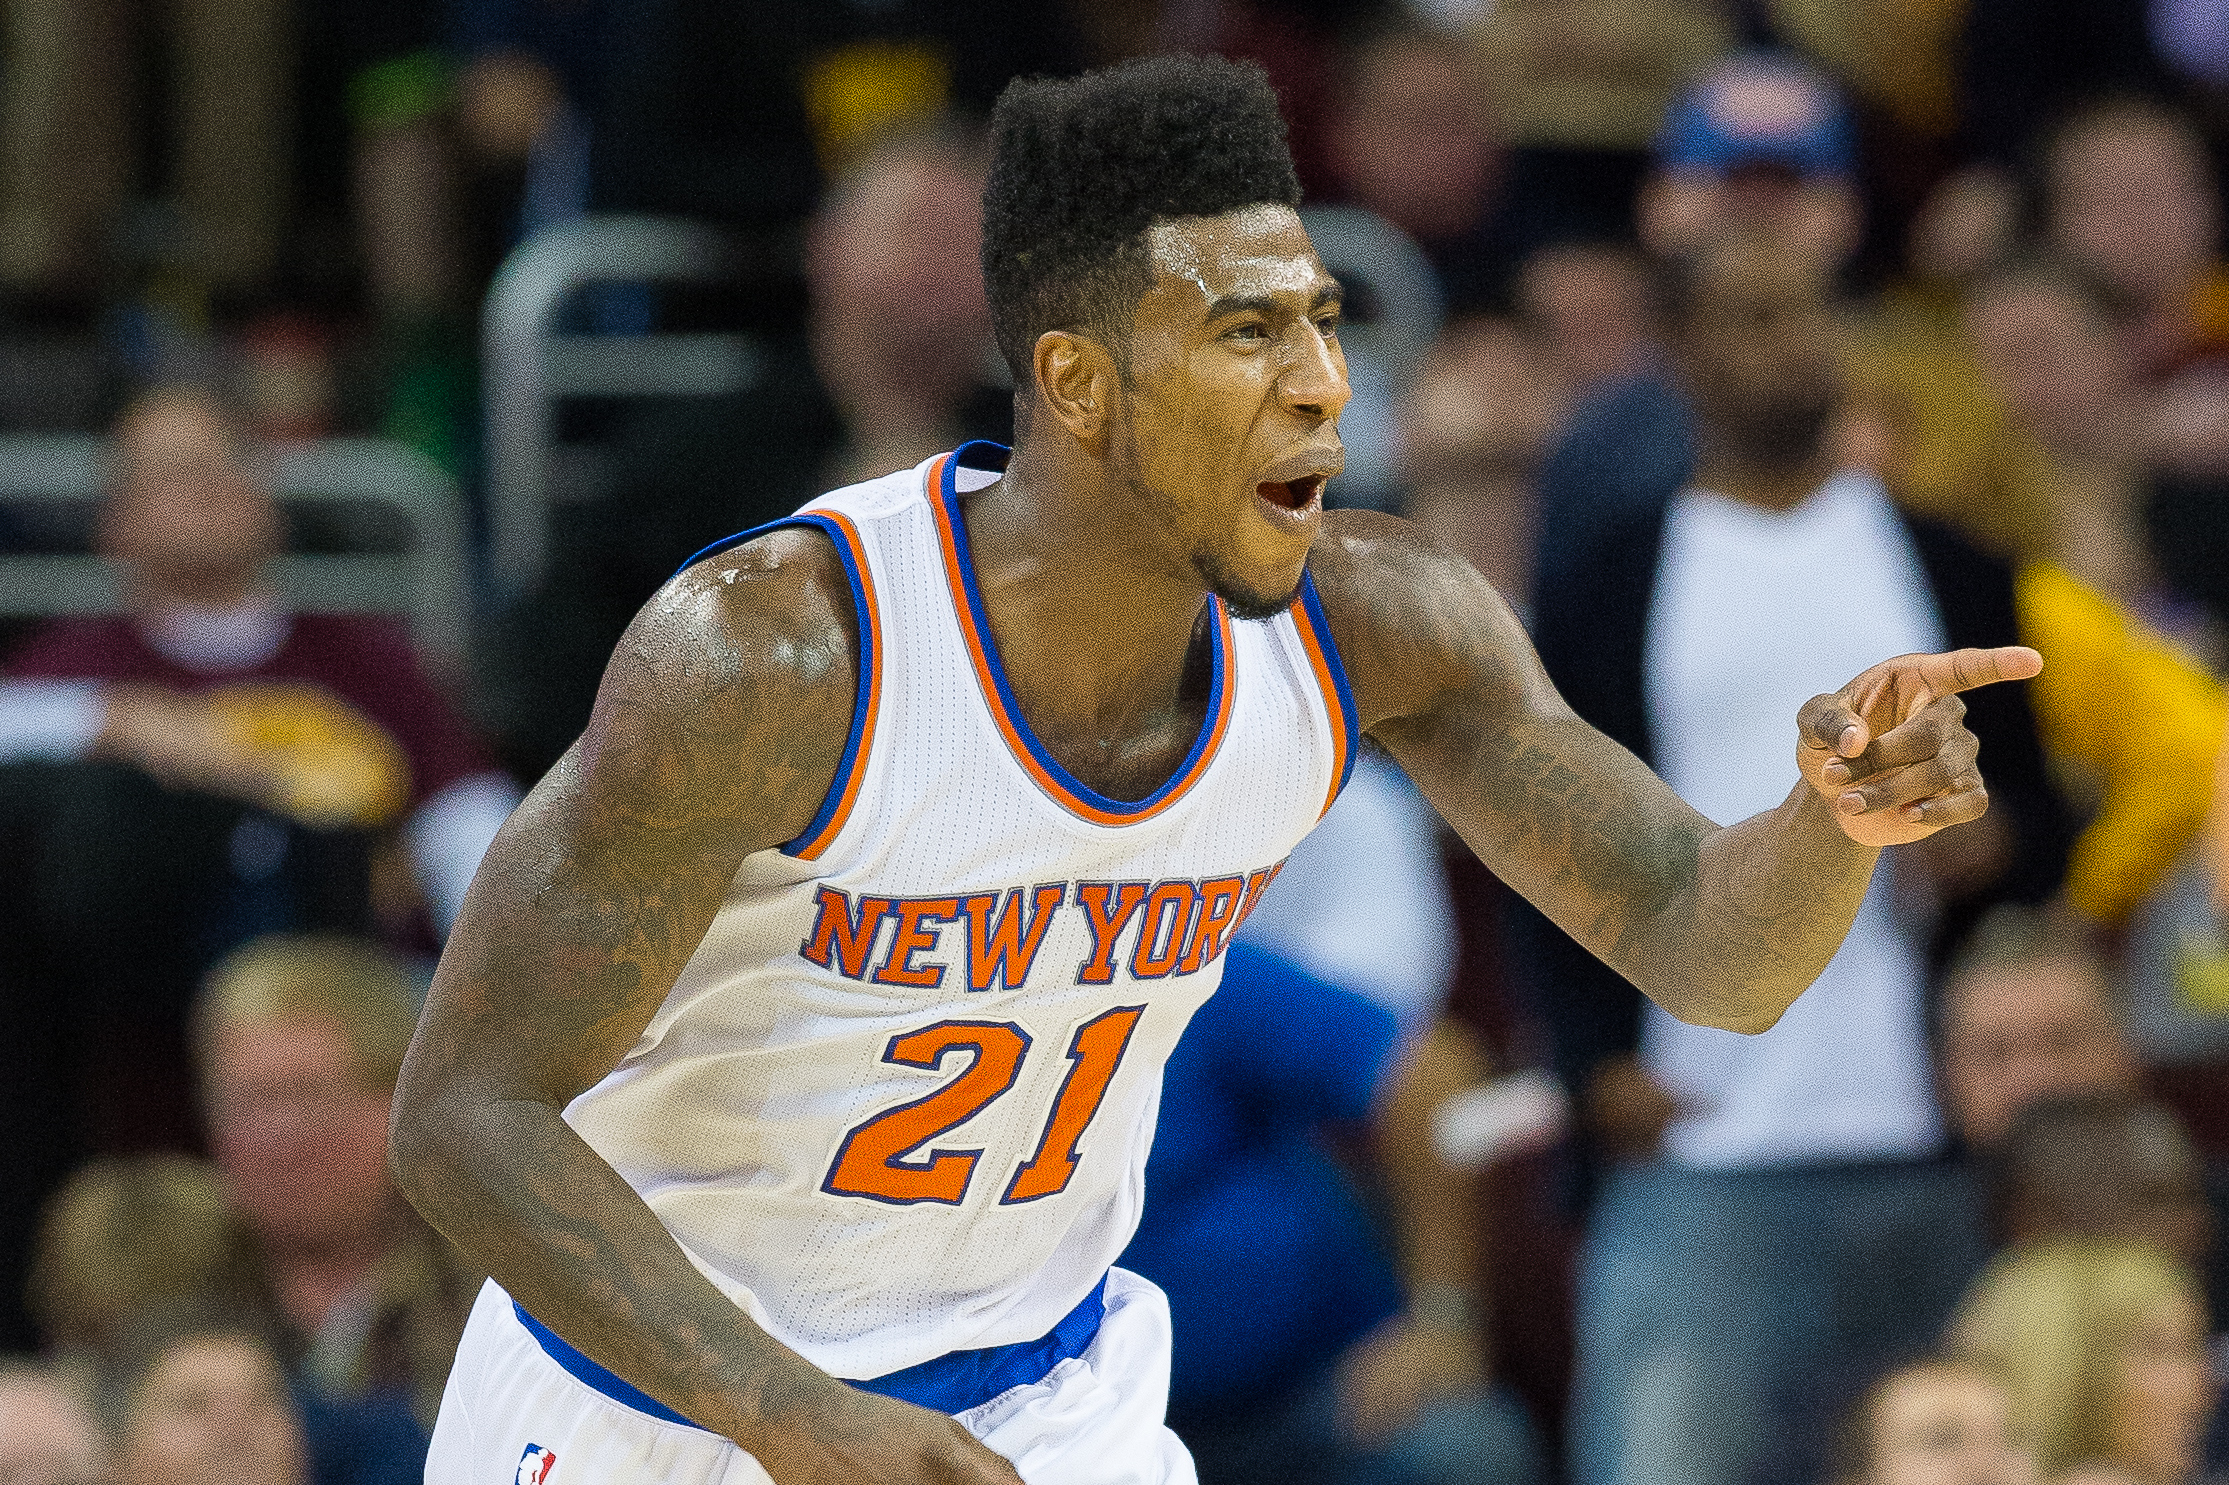 Why Are New York Knicks so Desperate to Trade Iman Shumpert